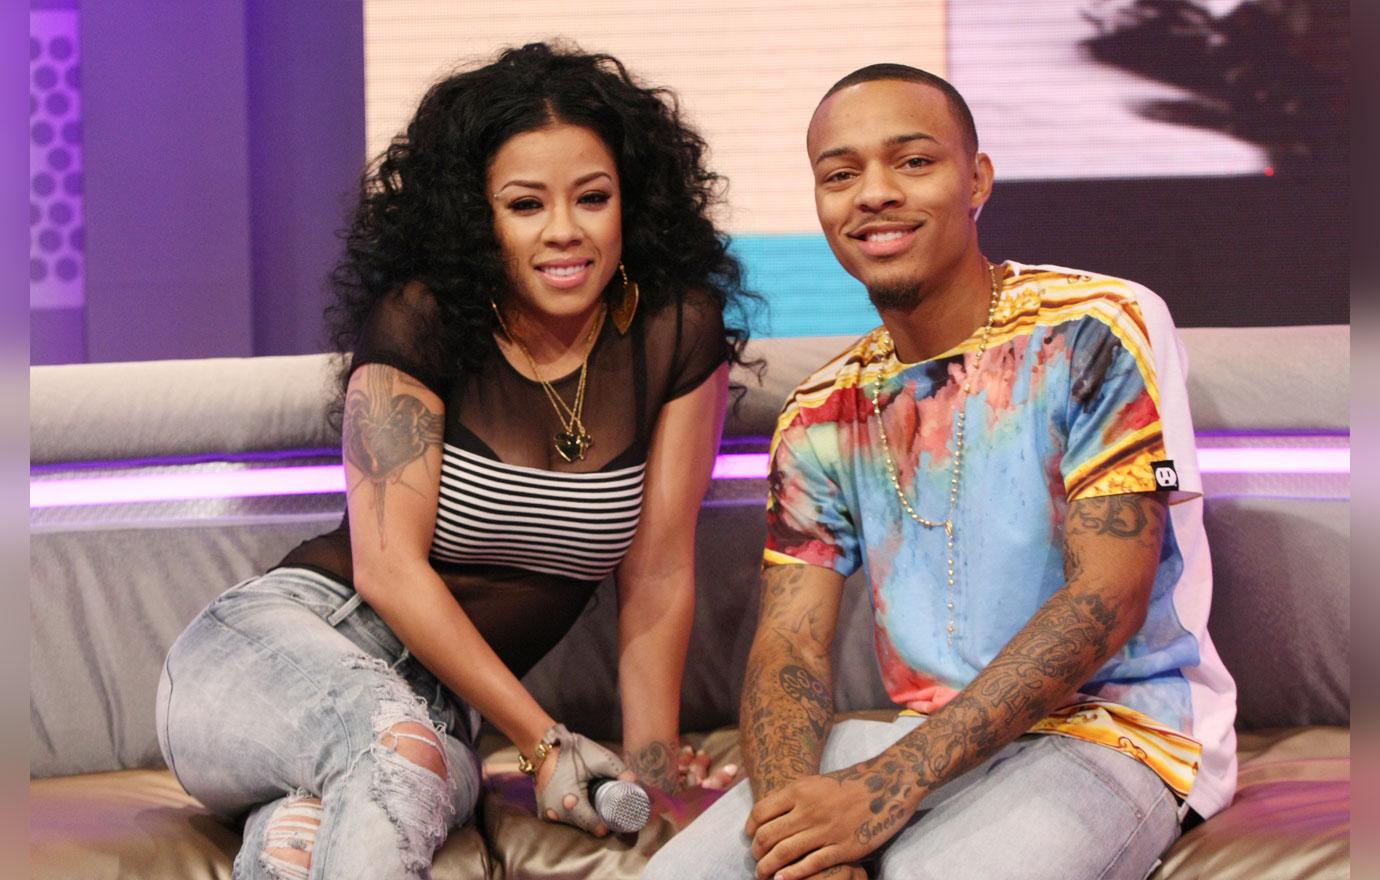 Bow wow with girlfriend naked